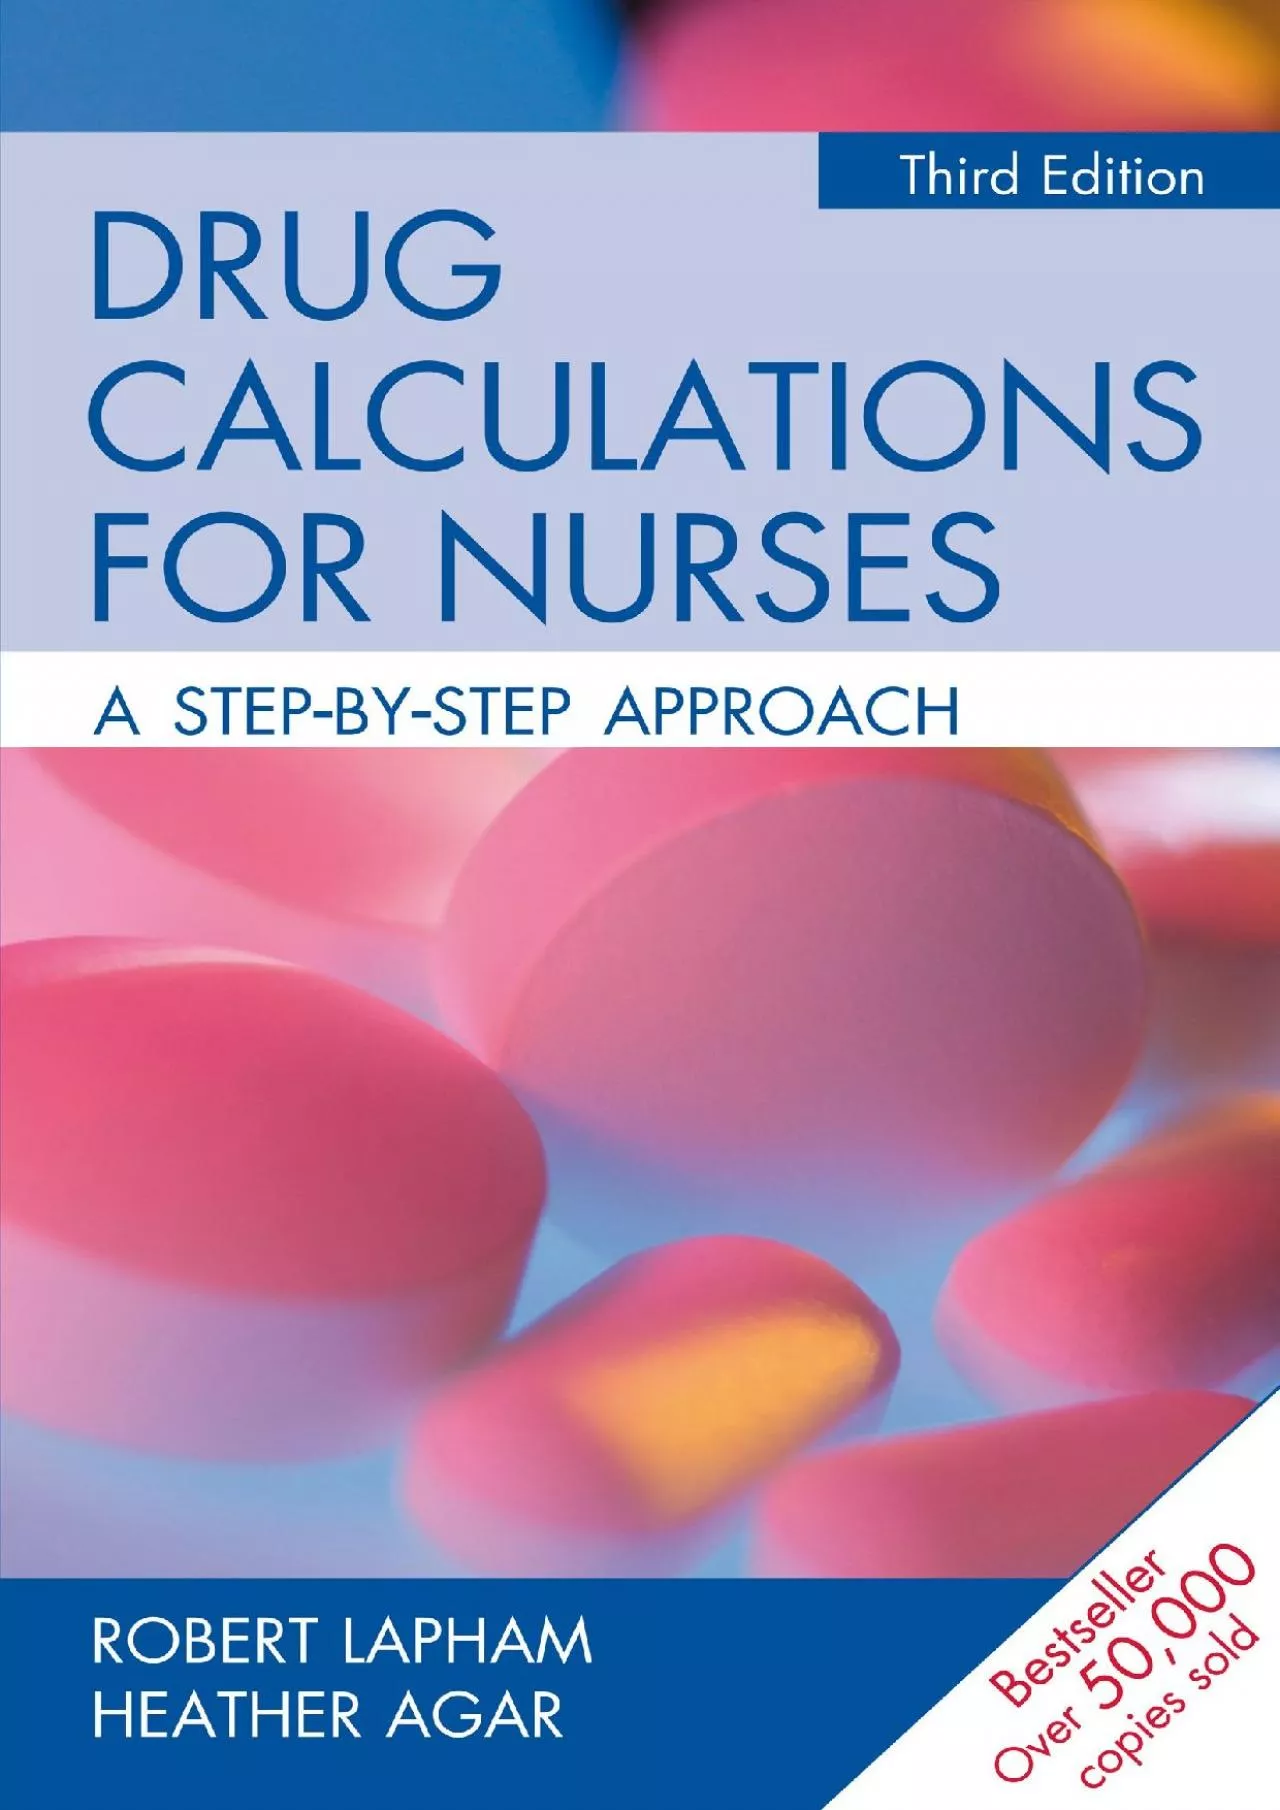 (EBOOK)-Drug Calculations for Nurses: A Step-by-Step Approach